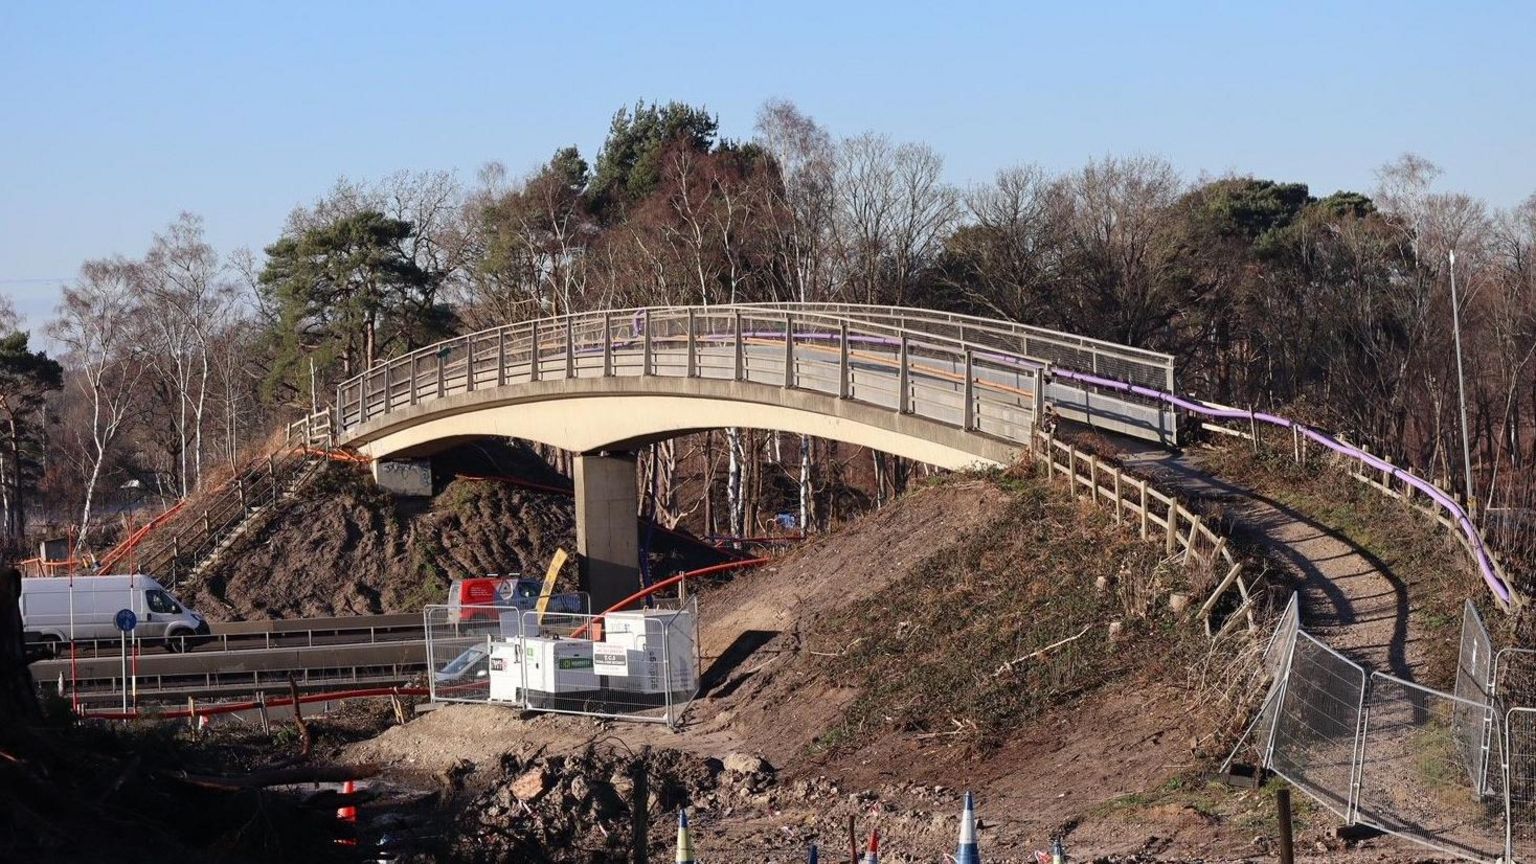 A building site featuring a central curved footbridge over a major road with woodland in the background